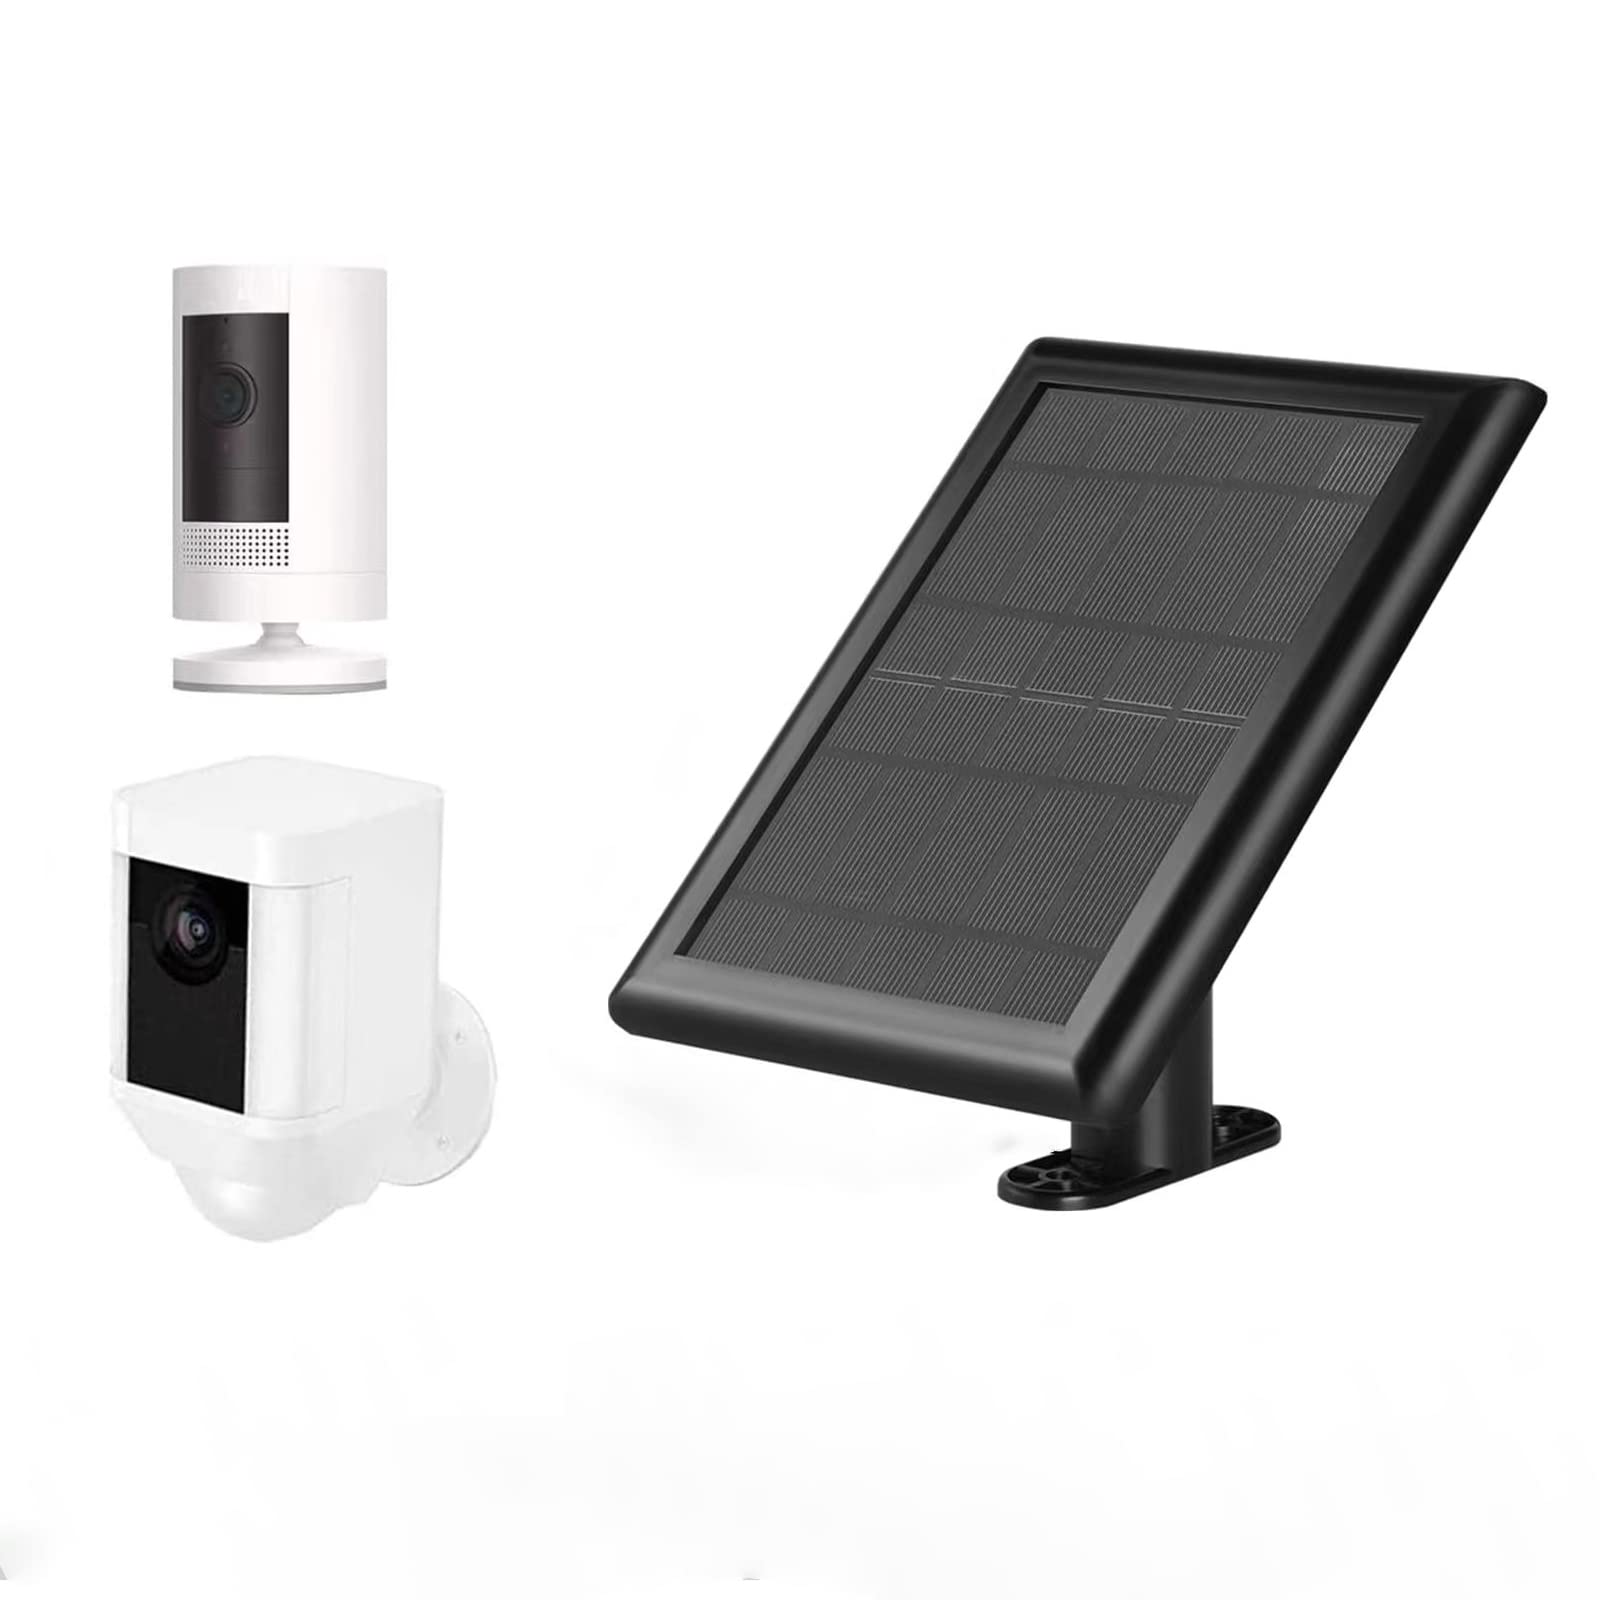 Power Your Security: 5W Solar Panel Charger for Ring